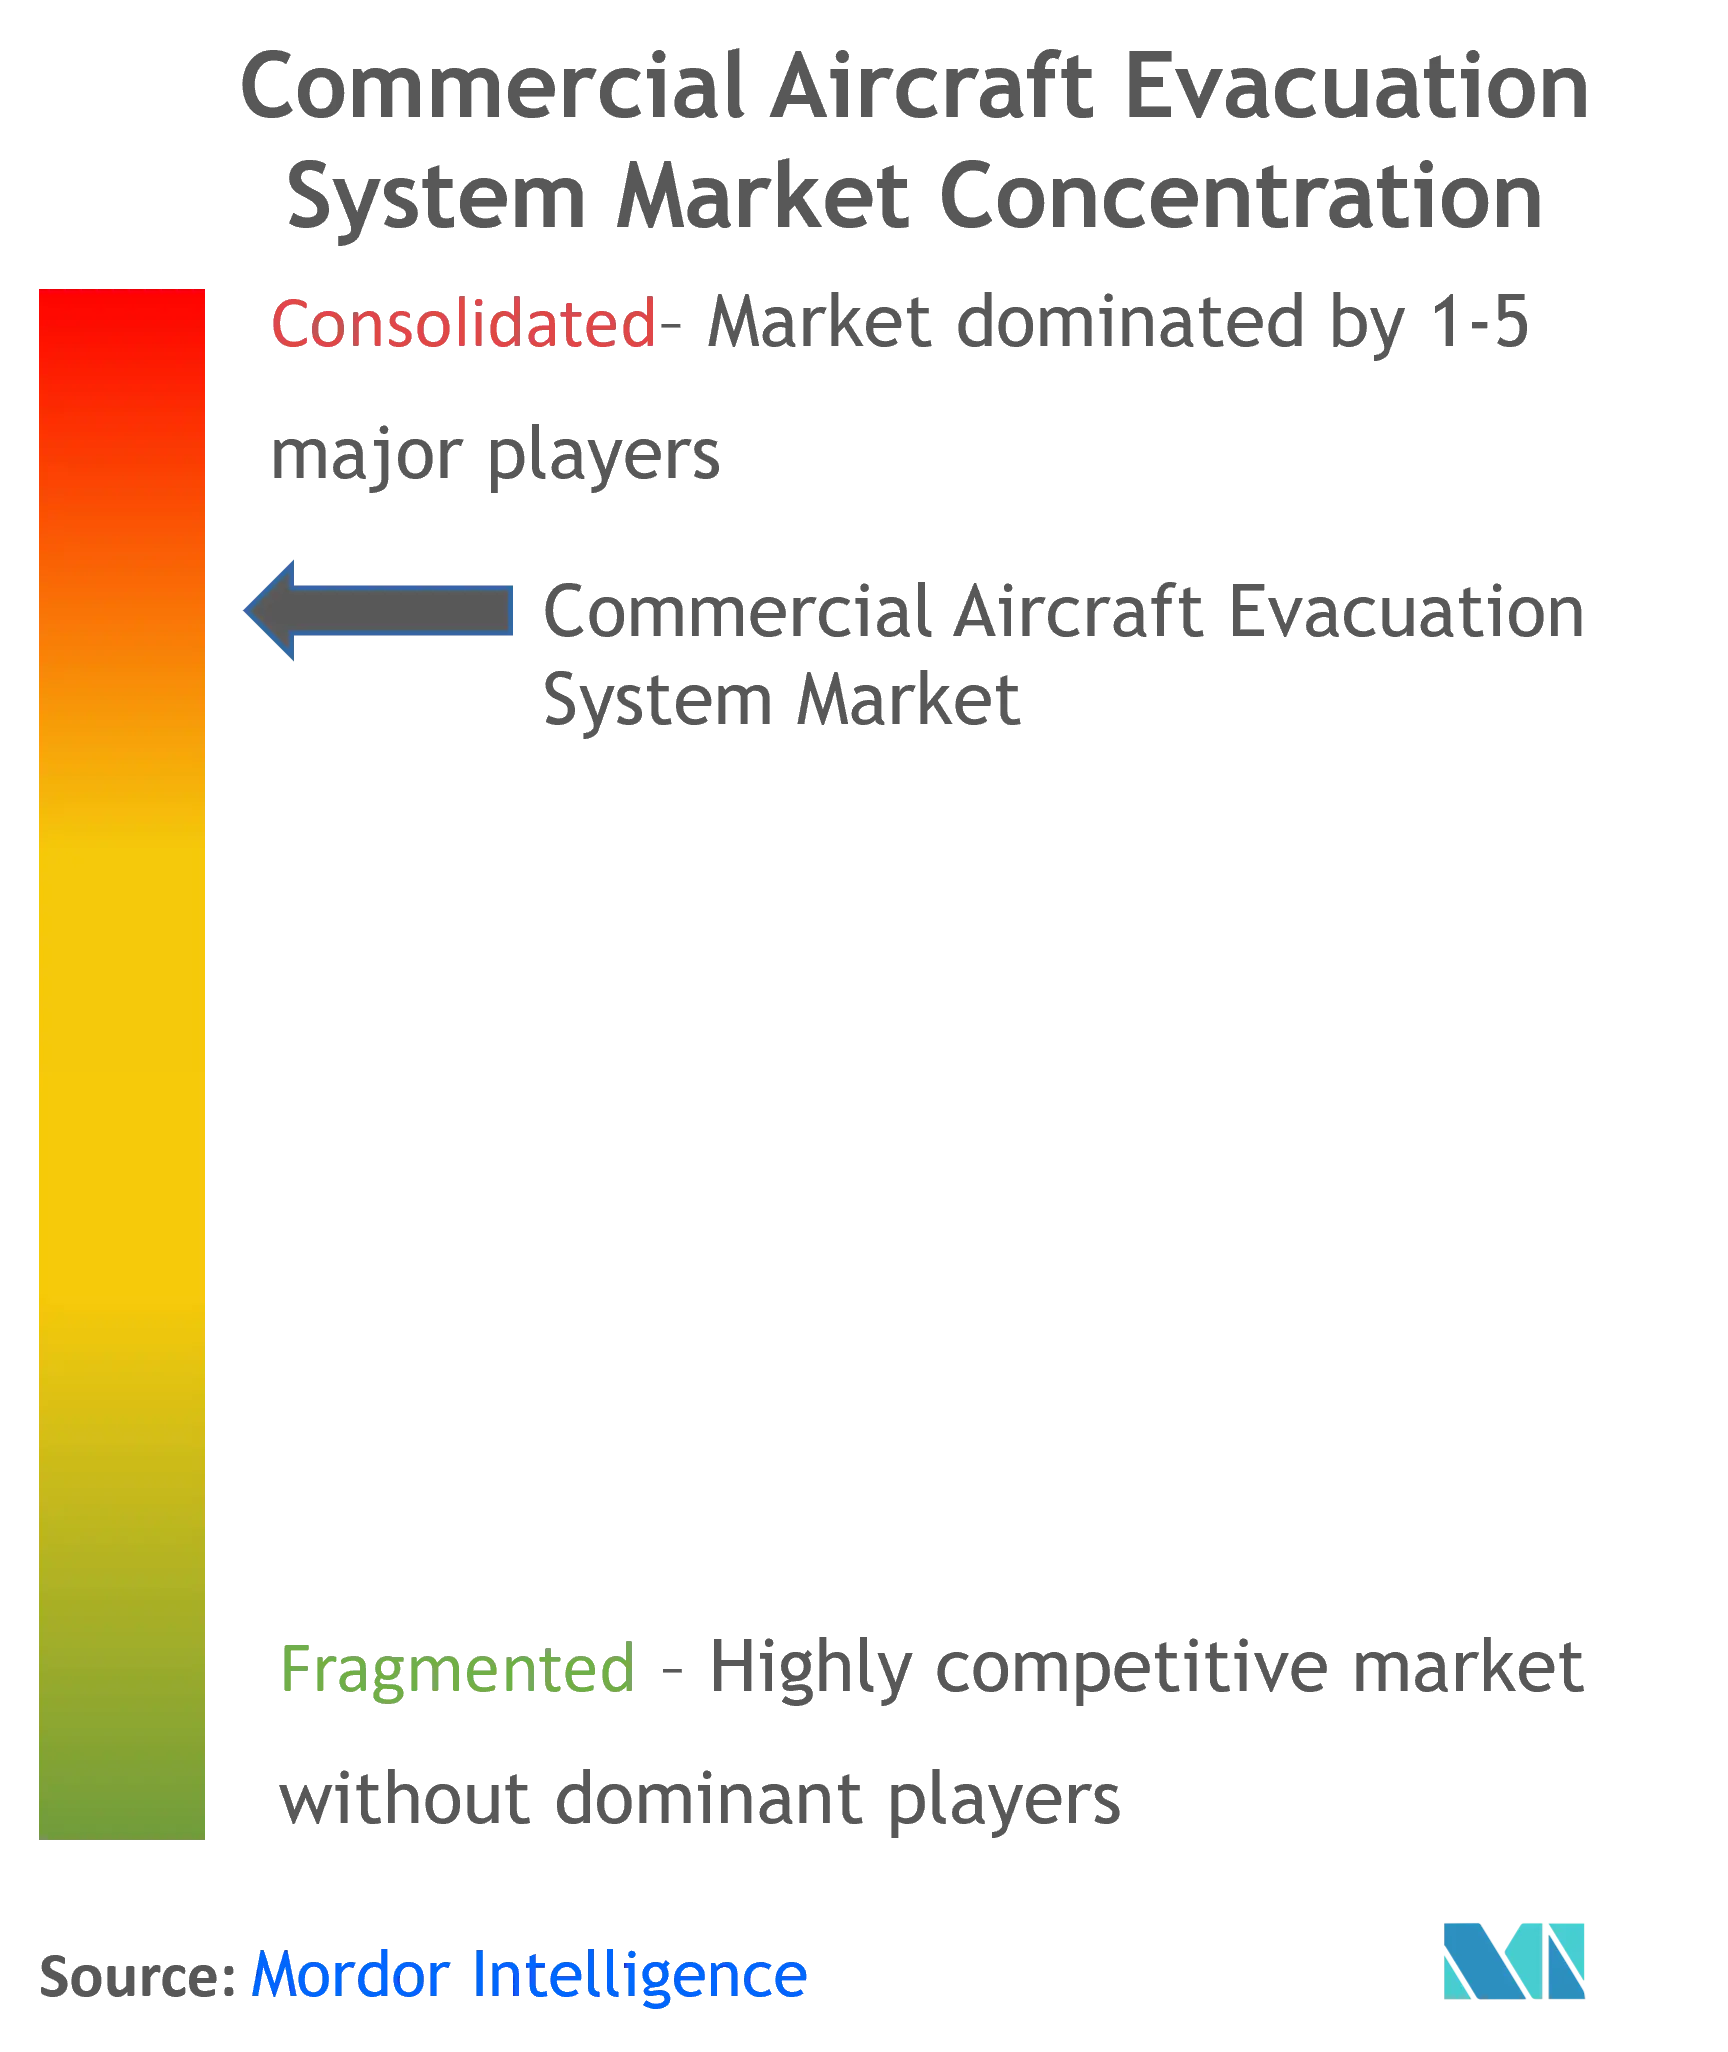 Commercial Aircraft Evacuation System Market Concentration